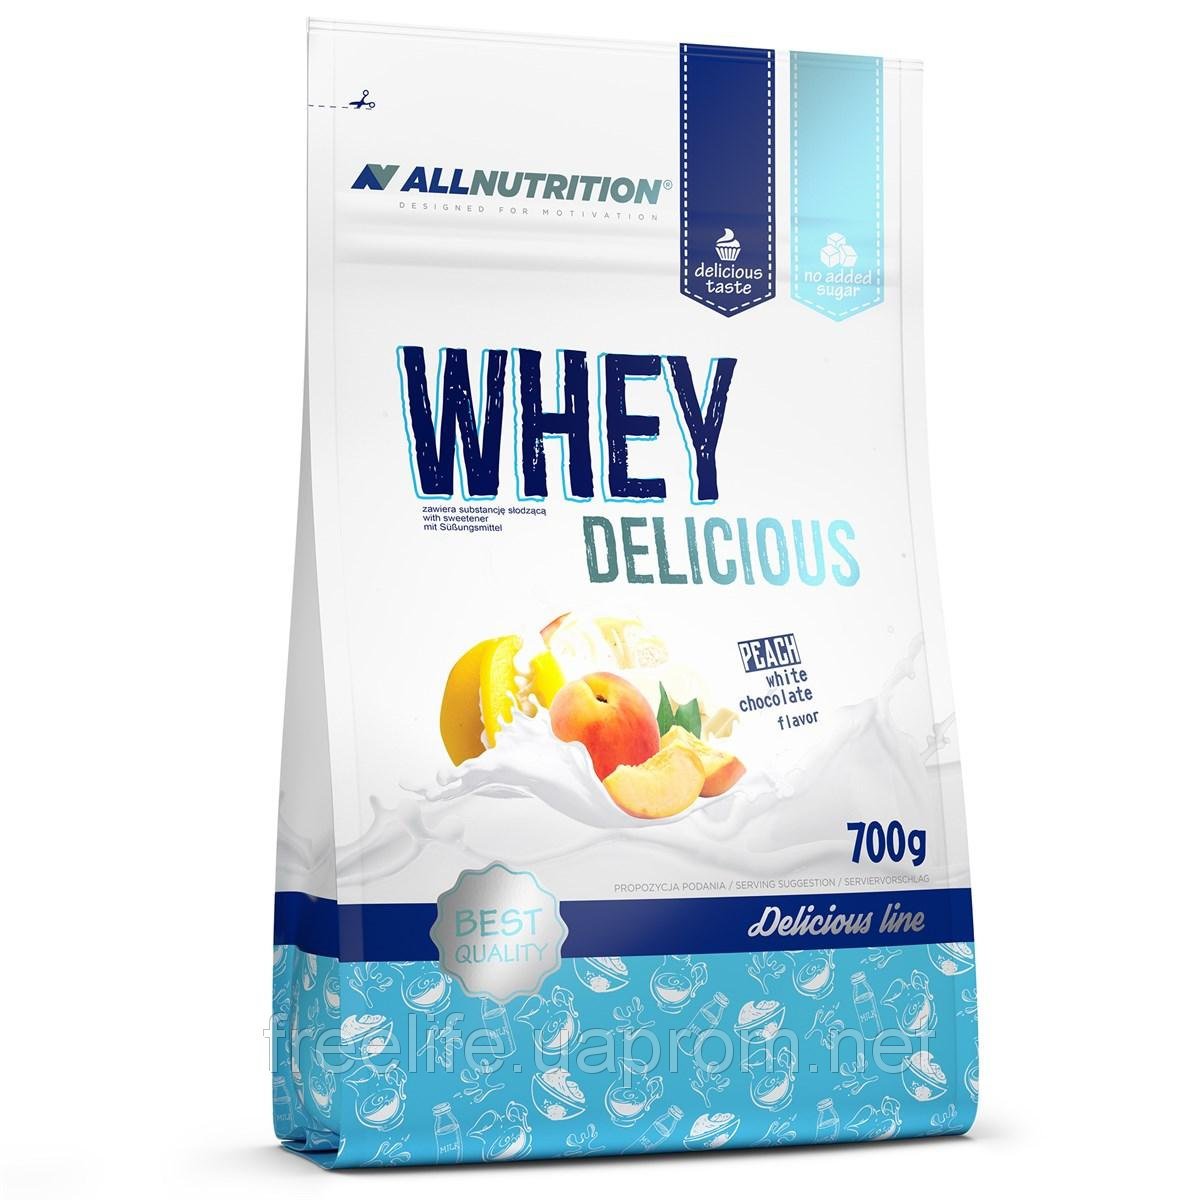 Whey Delicious, 700 g, AllNutrition. Whey Protein. recovery Anti-catabolic properties Lean muscle mass 